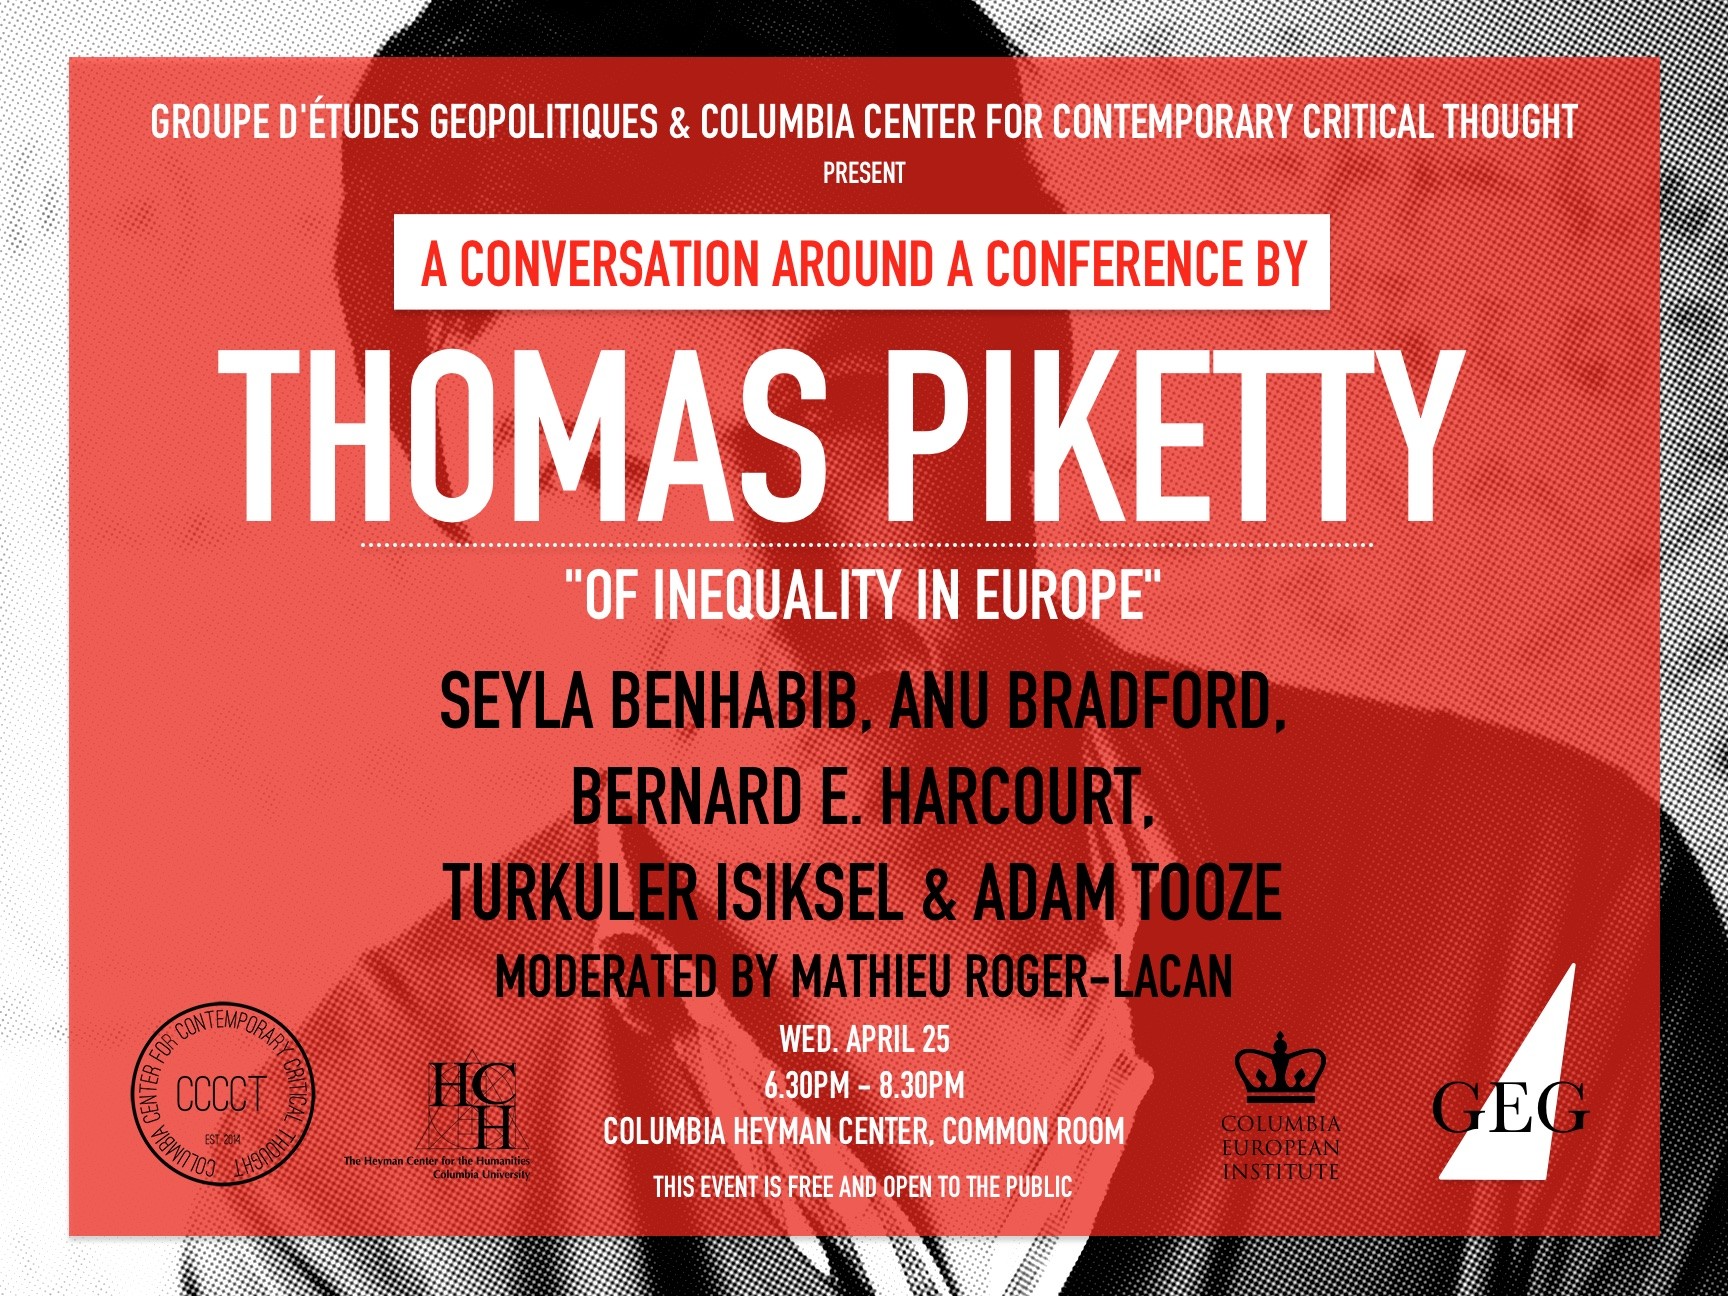 Flyer for "Thomas Piketty" event